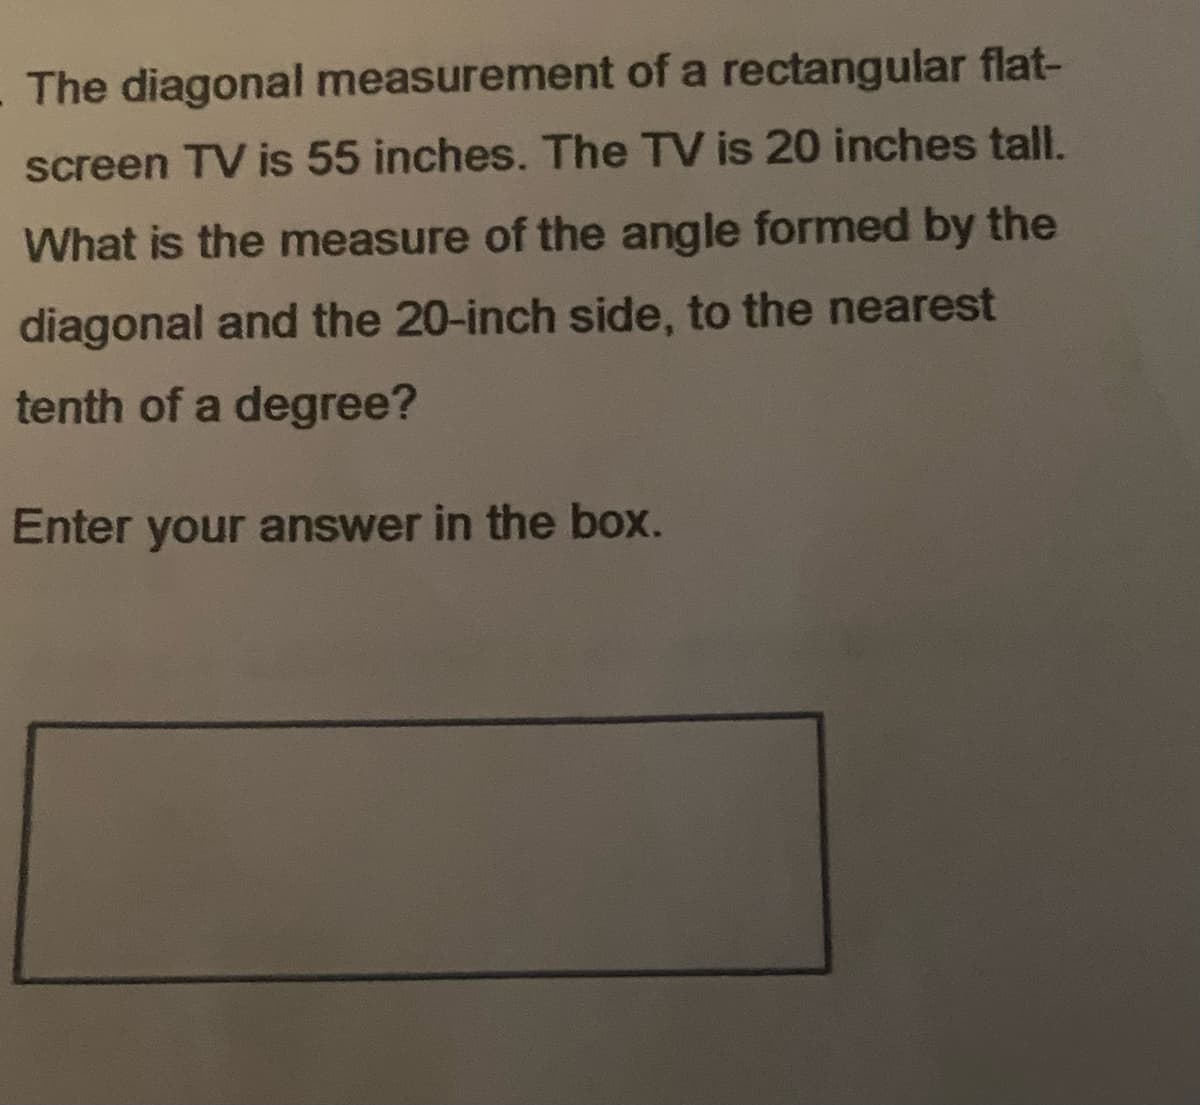 The diagonal measurement of a rectangular flat-
screen TV is 55 inches. The TV is 20 inches tall.
What is the measure of the angle formed by the
diagonal and the 20-inch side, to the nearest
tenth of a degree?
Enter your answer in the box.
